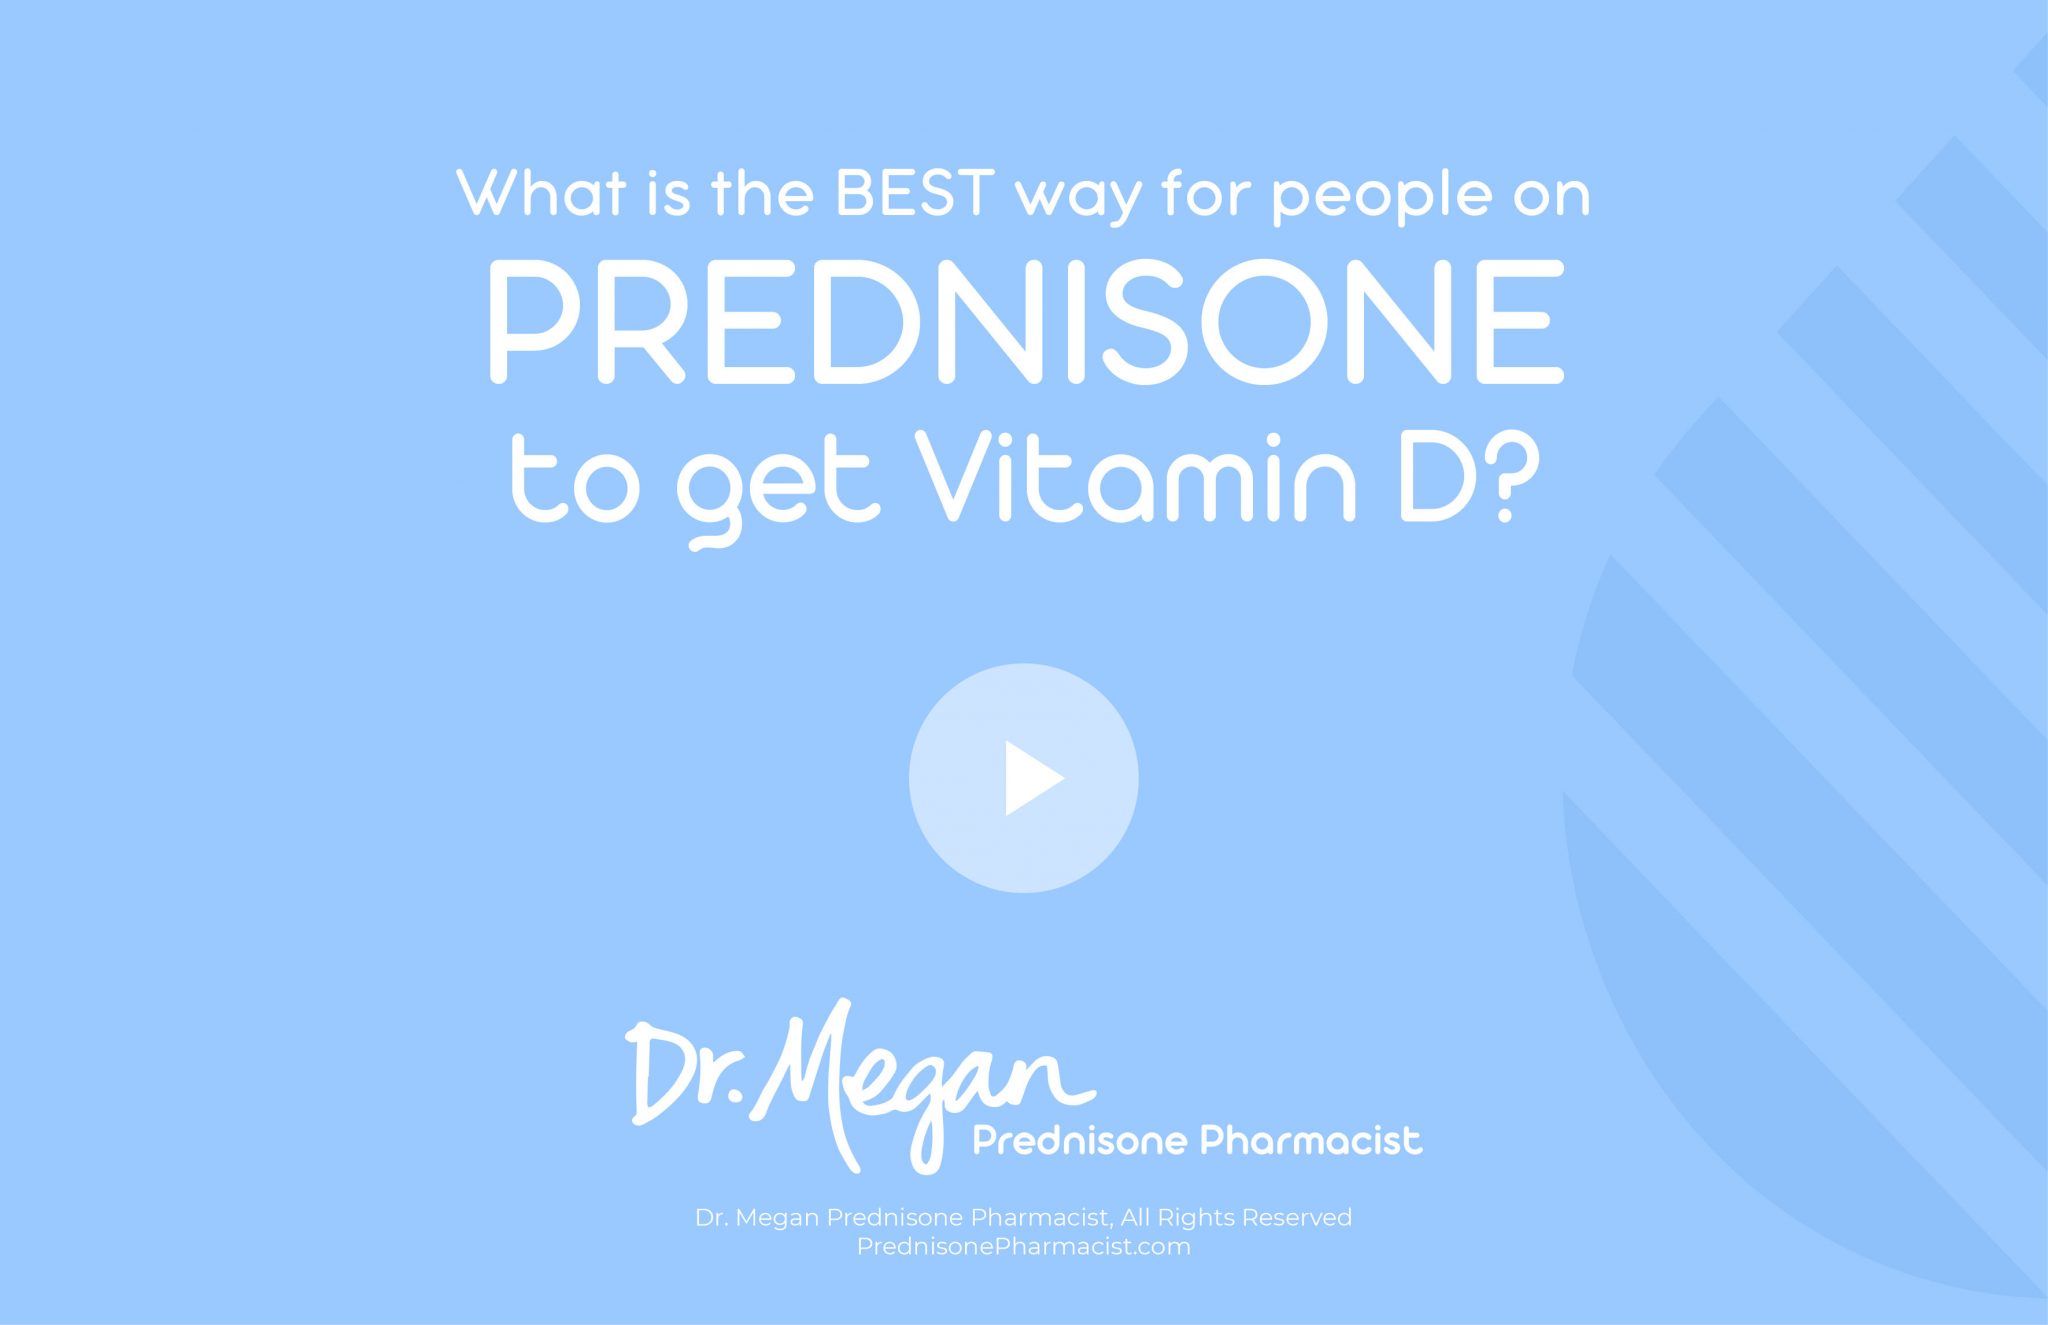 The BEST way to get vitamin D for people on Prednisone